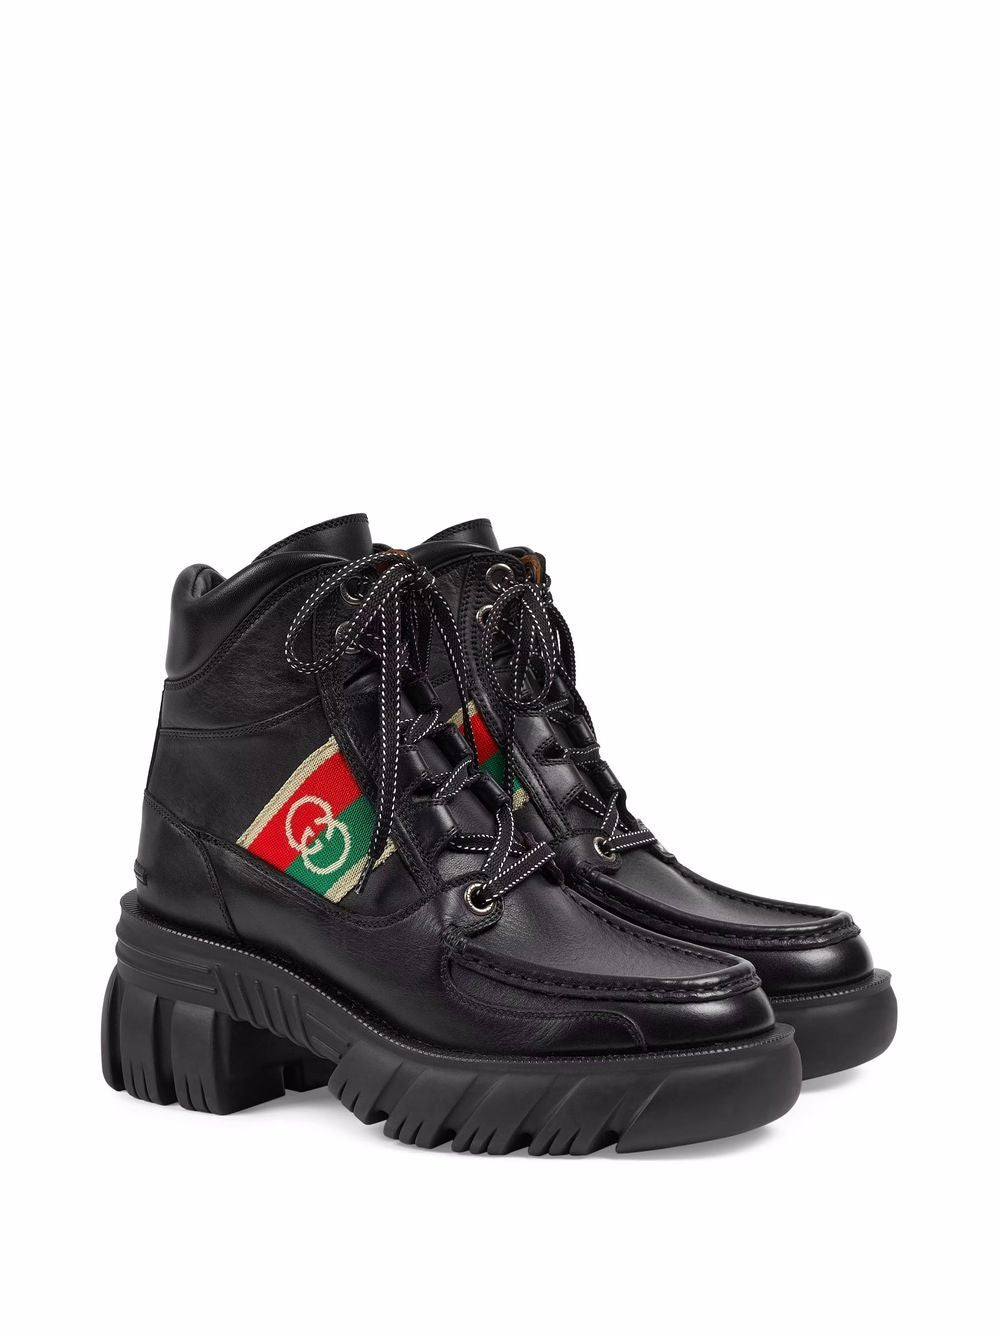 GUCCI Interlocking G panel ankle boots